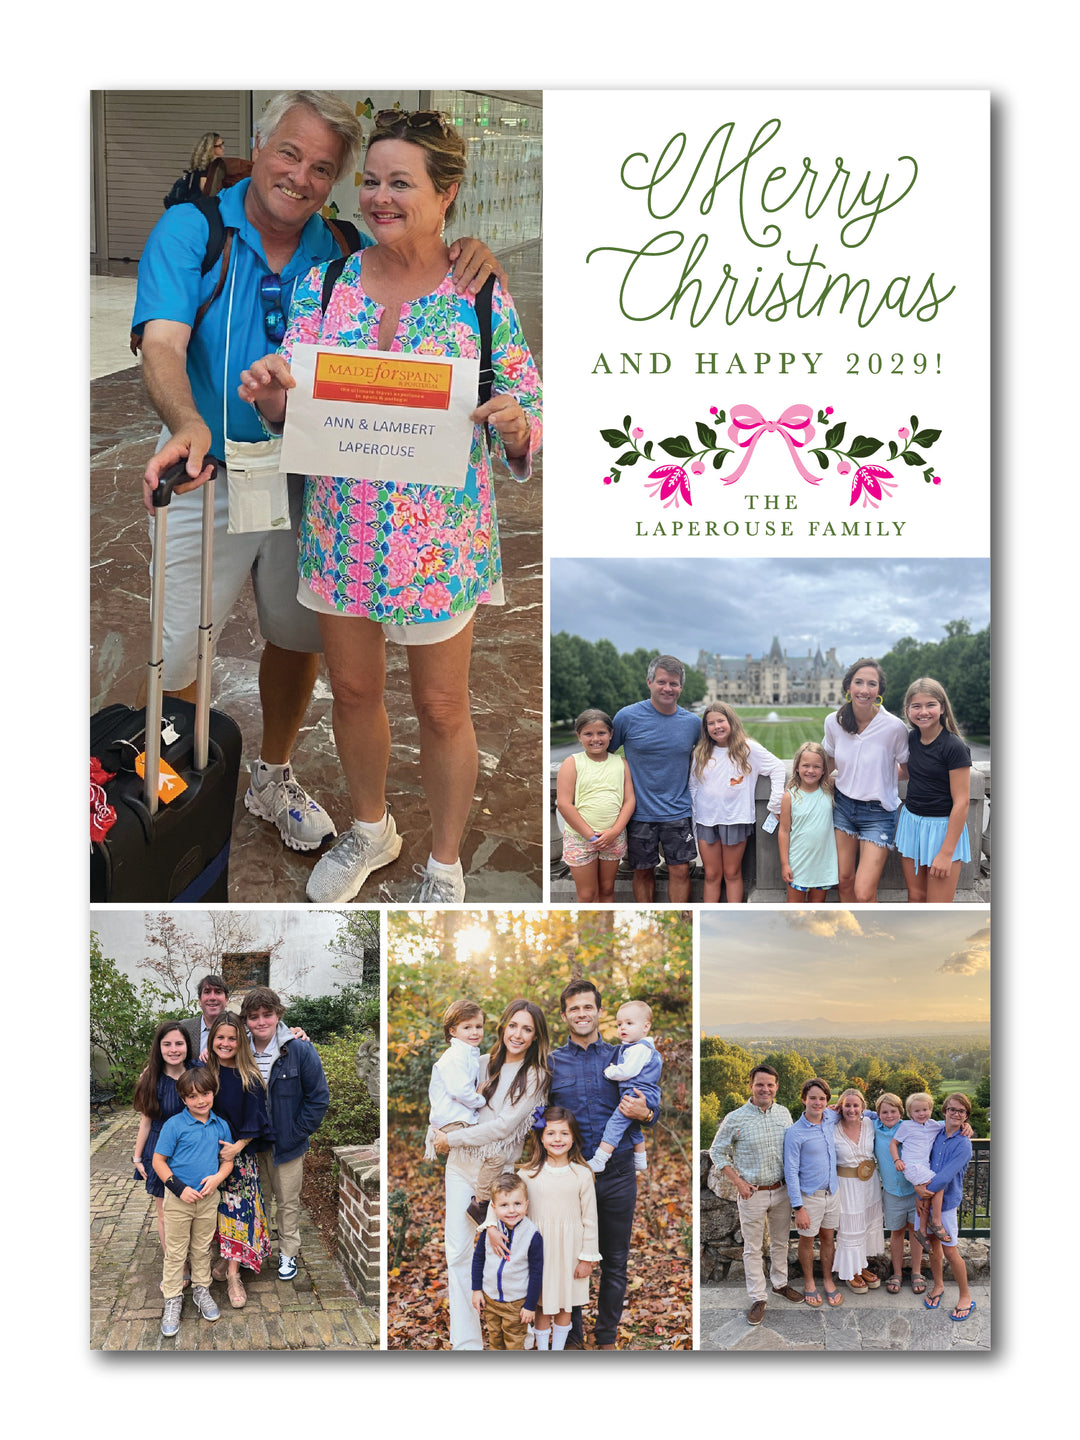 The Laperouse Christmas Card